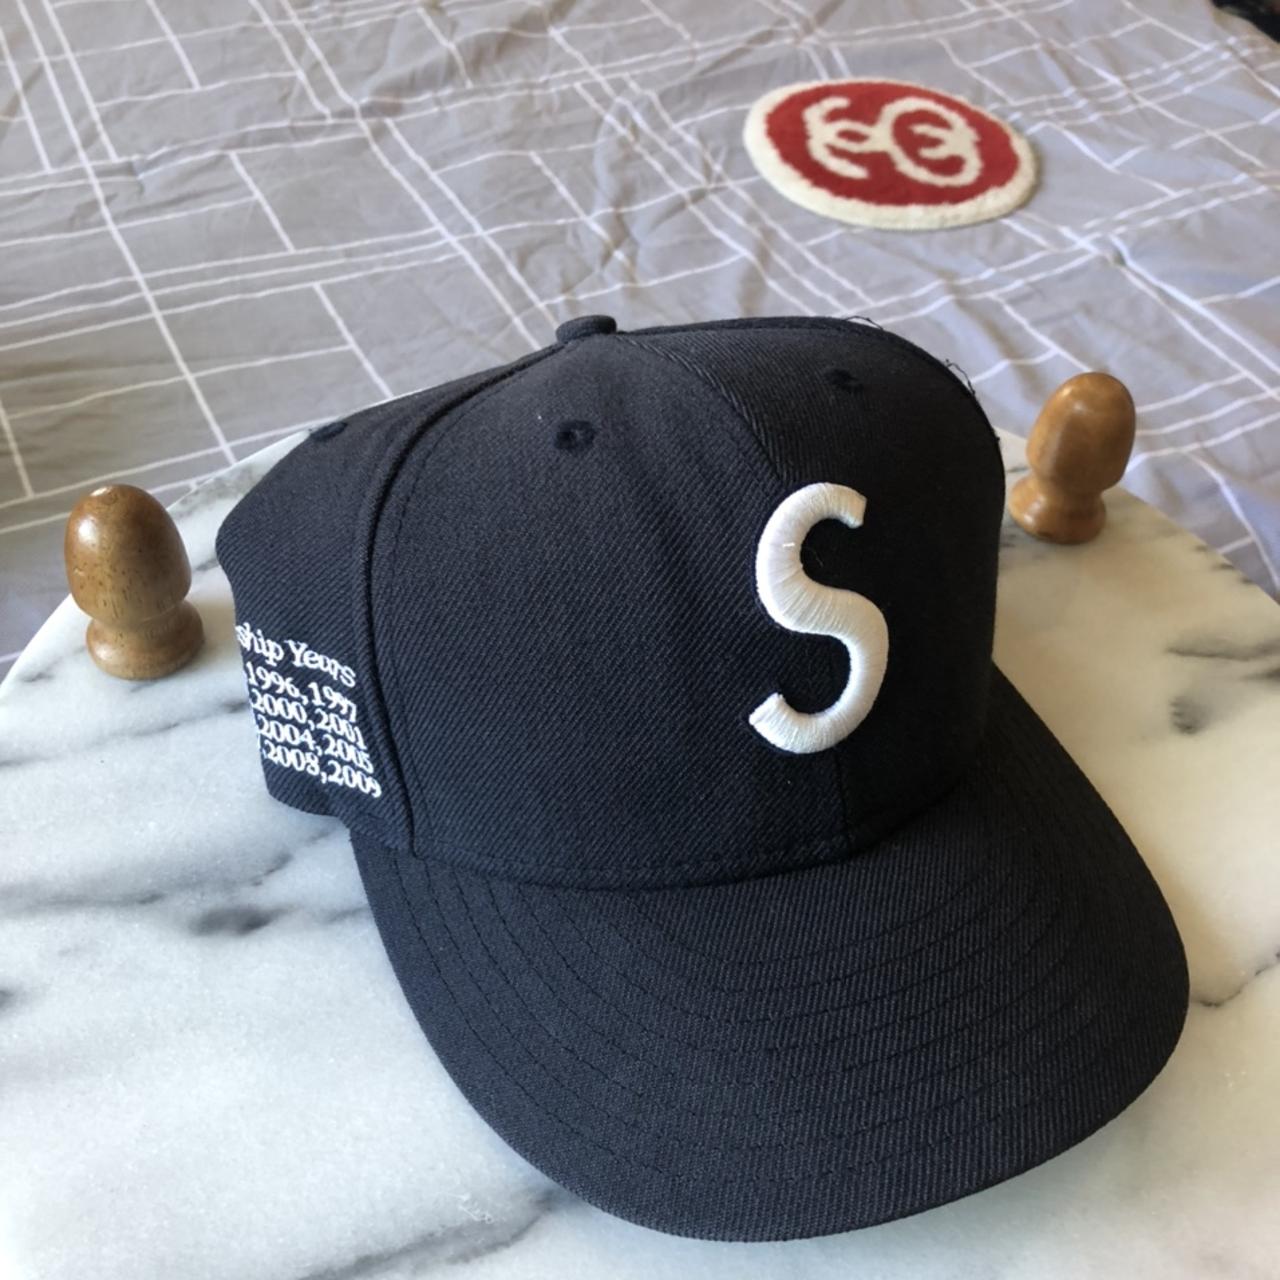 Supreme x New era, Fitted 7 1/4, 2009, Great condition